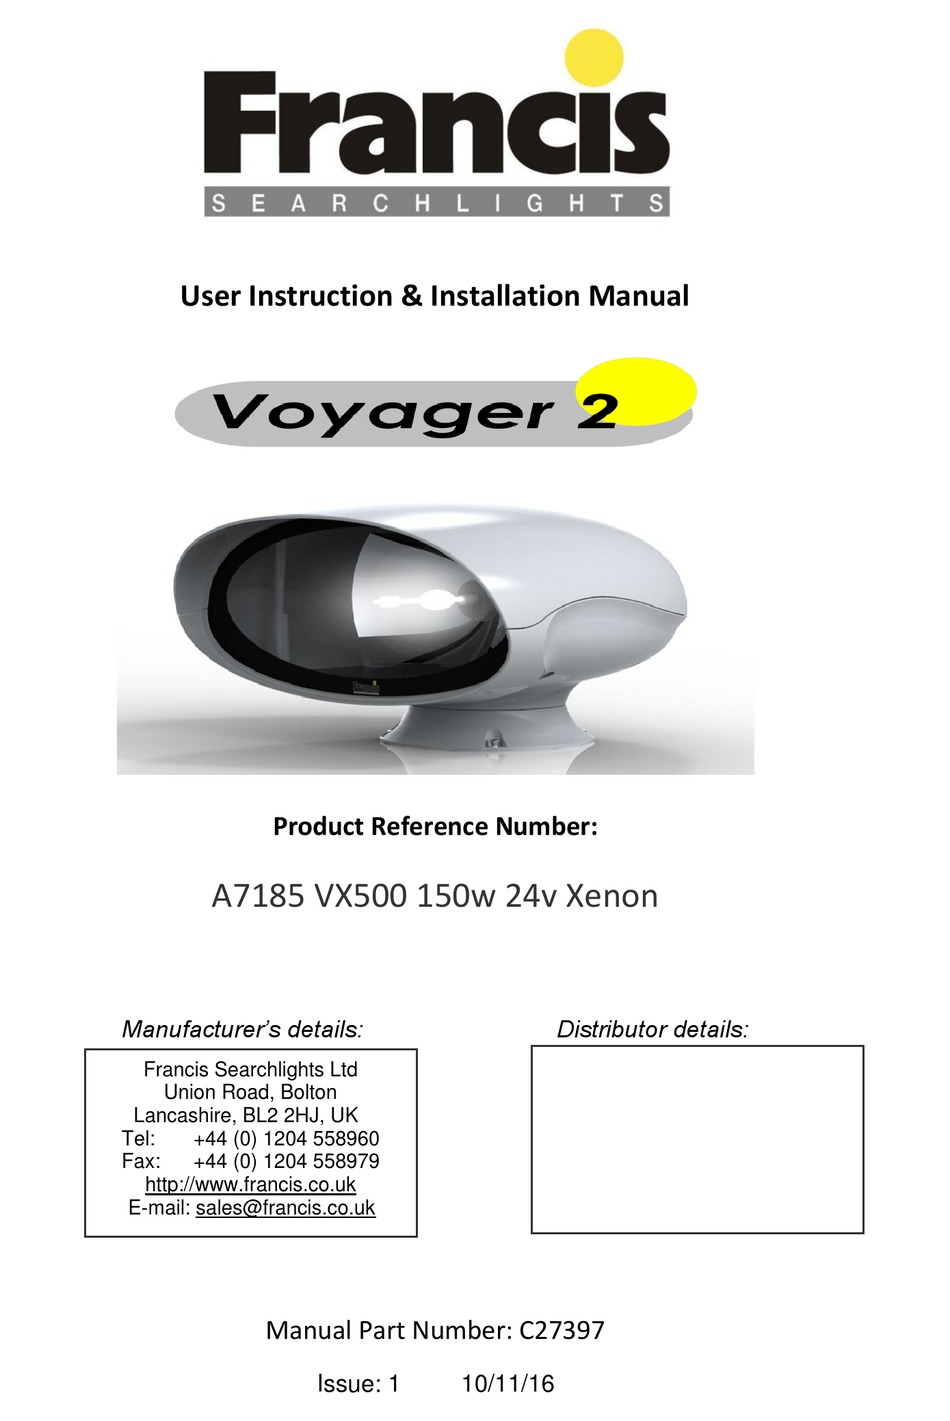 FRANCIS SEARCHLIGHTS VOYAGER 2 USER INSTRUCTION & INSTALLATION MANUAL